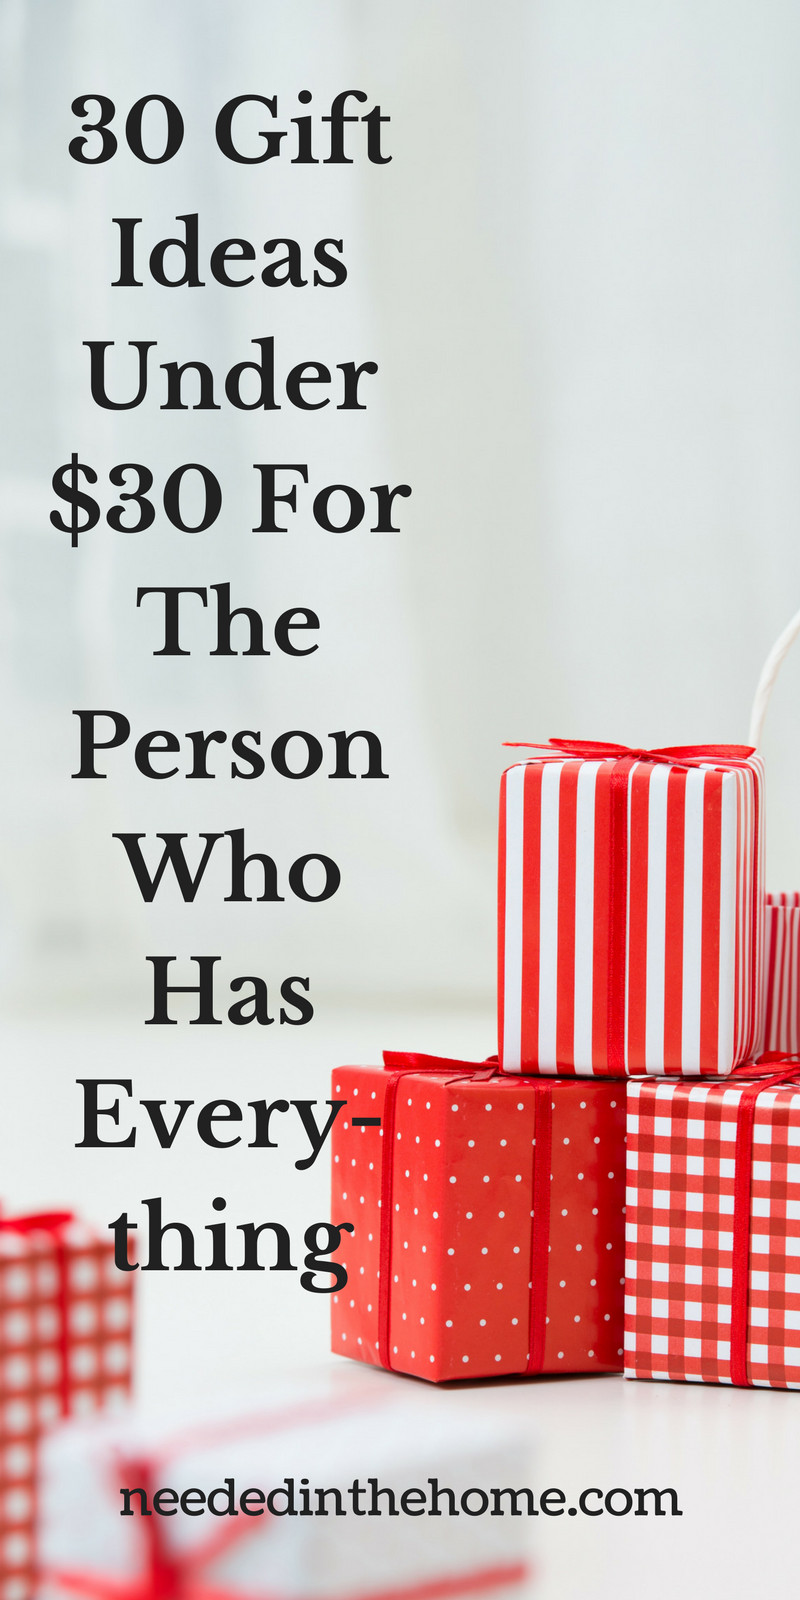 Gift Ideas For Couples Under 30
 30 Gift Ideas Under $30 For The Person Who Has Everything